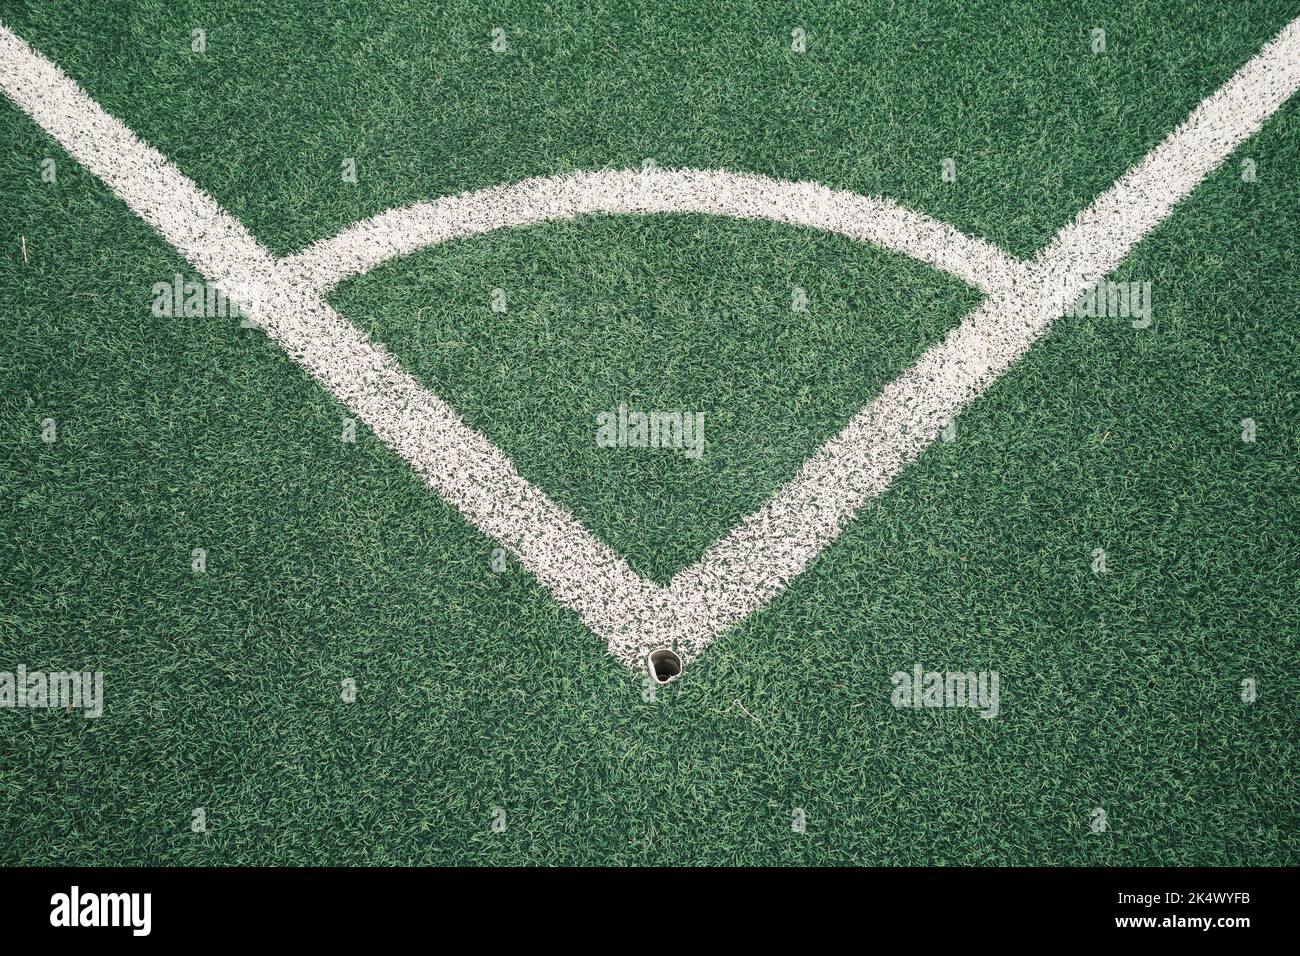 From above view of lines in football field Stock Photo